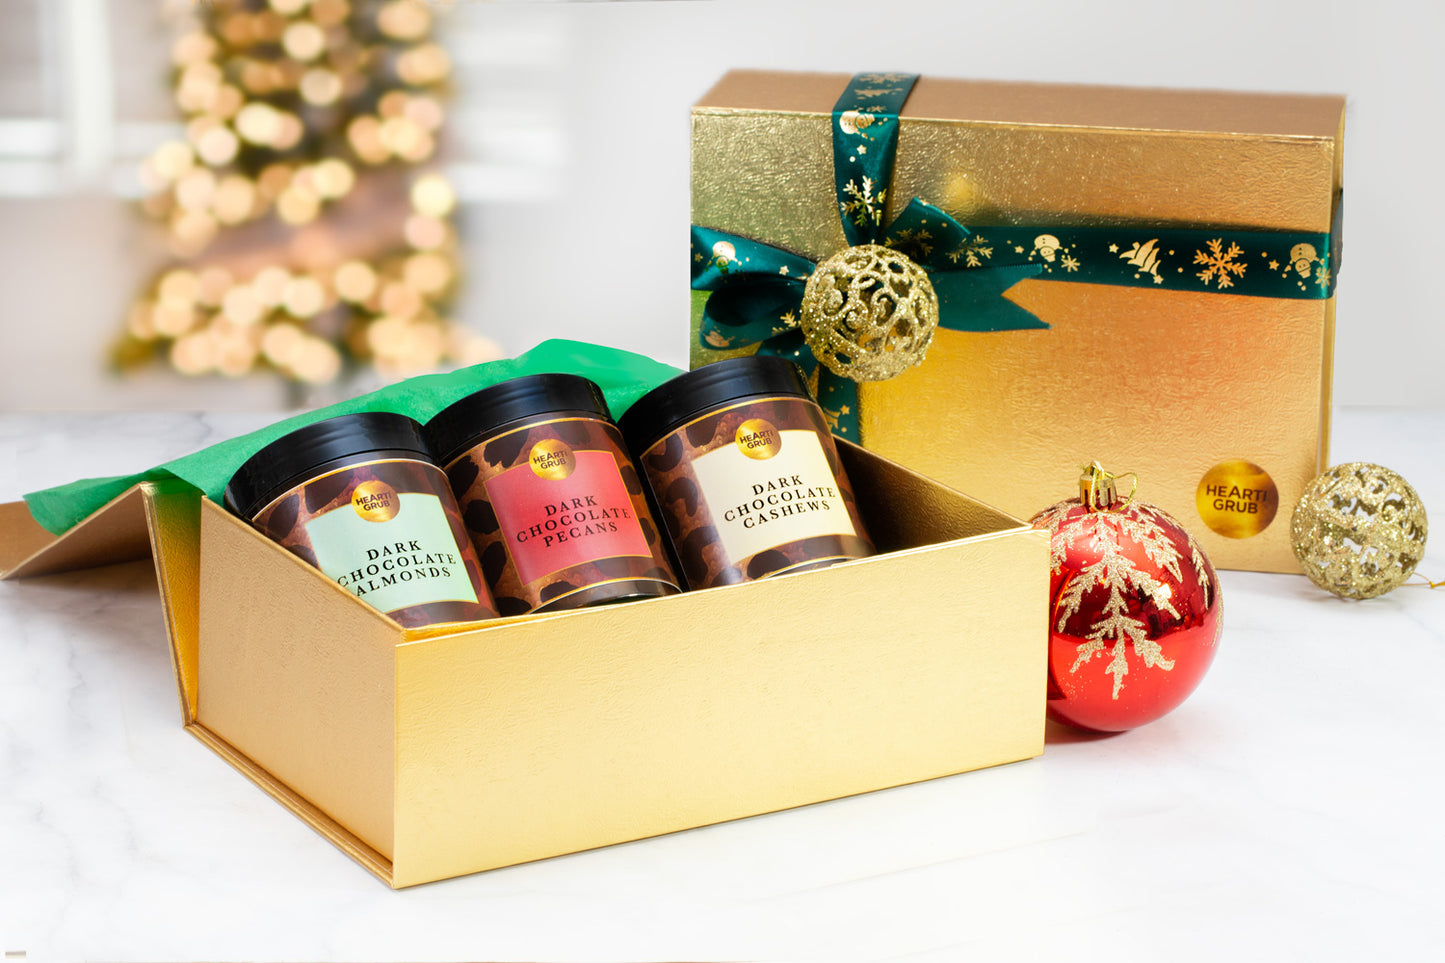 Chrsitmas Gifts. Holiday Gifts. Made in UAE. Gourmet Gifting. HeartiGrub. Nut Butters. Home Delivery.